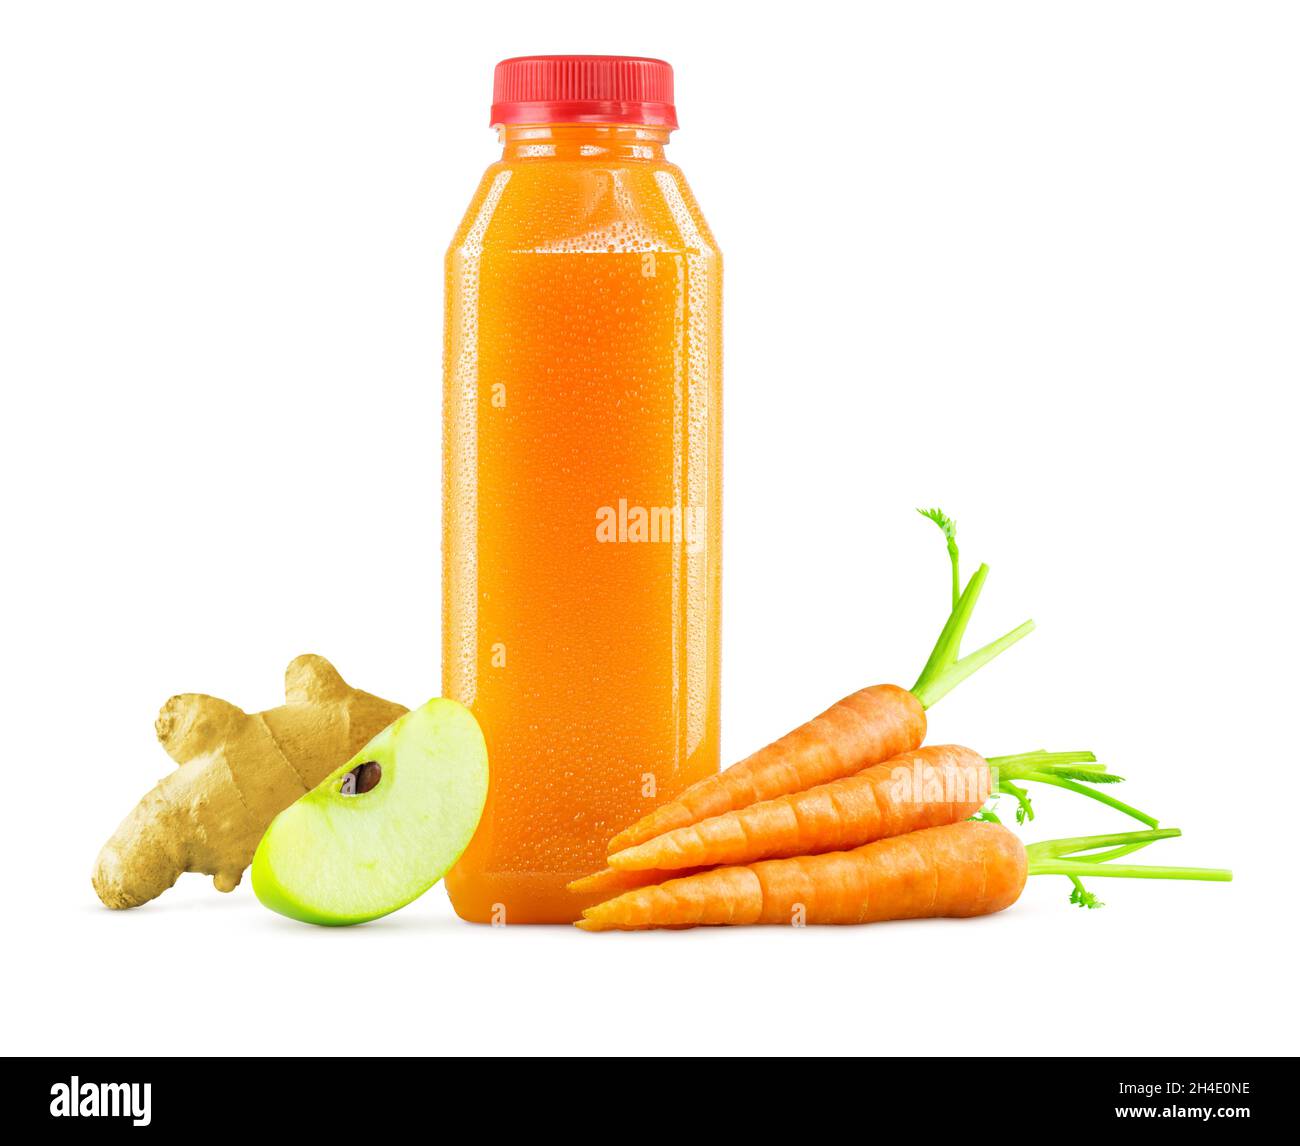 Freshly Squeezed Carrot Apple Ginger Juice in a Generic Plastic Bottle with Fruit and Vegetable Garnish Isolated on White Background Stock Photo